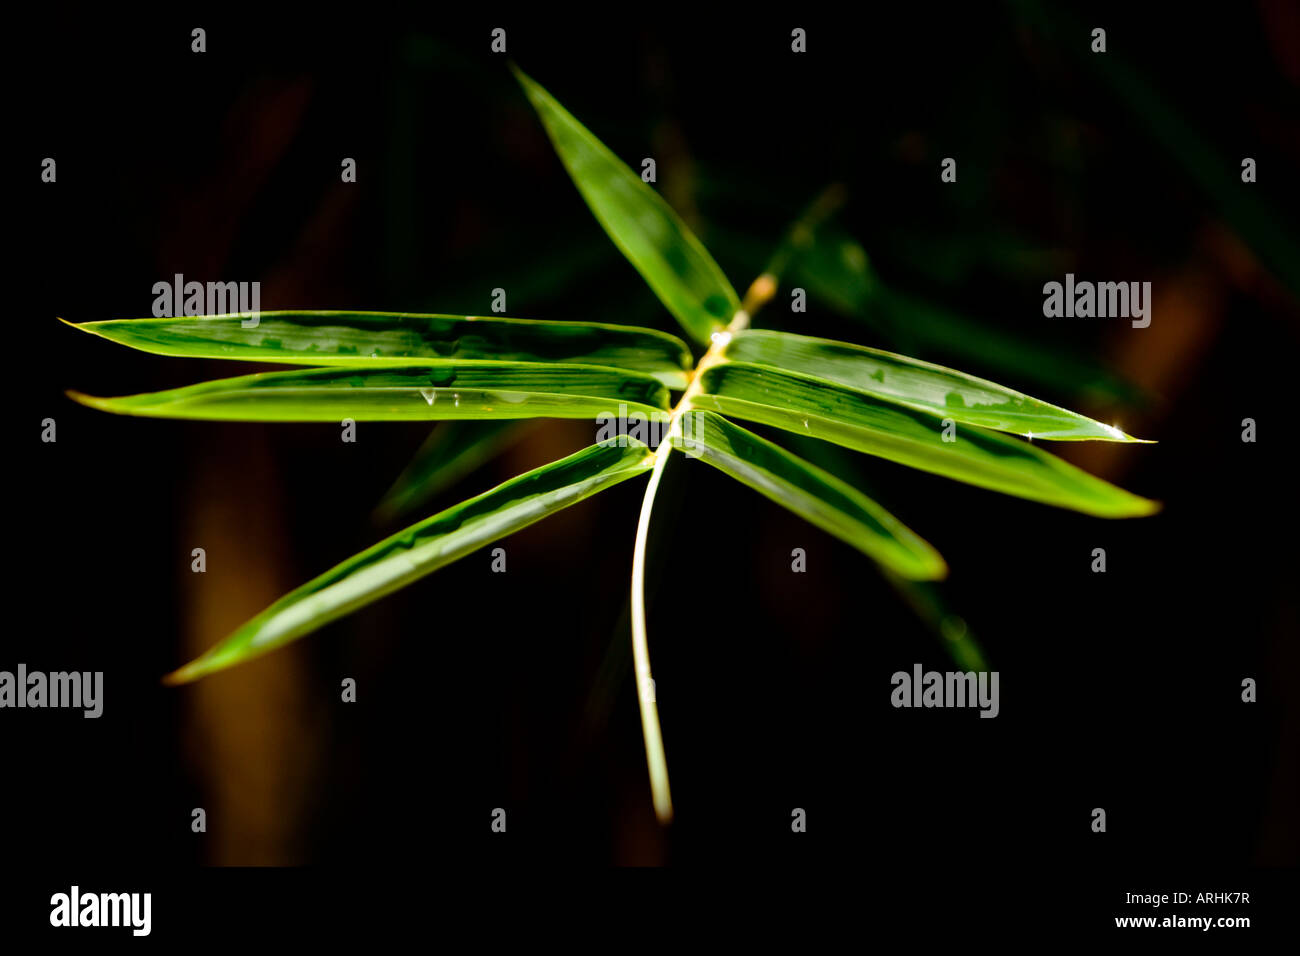 Abstract bamboo with water droplets Stock Photo